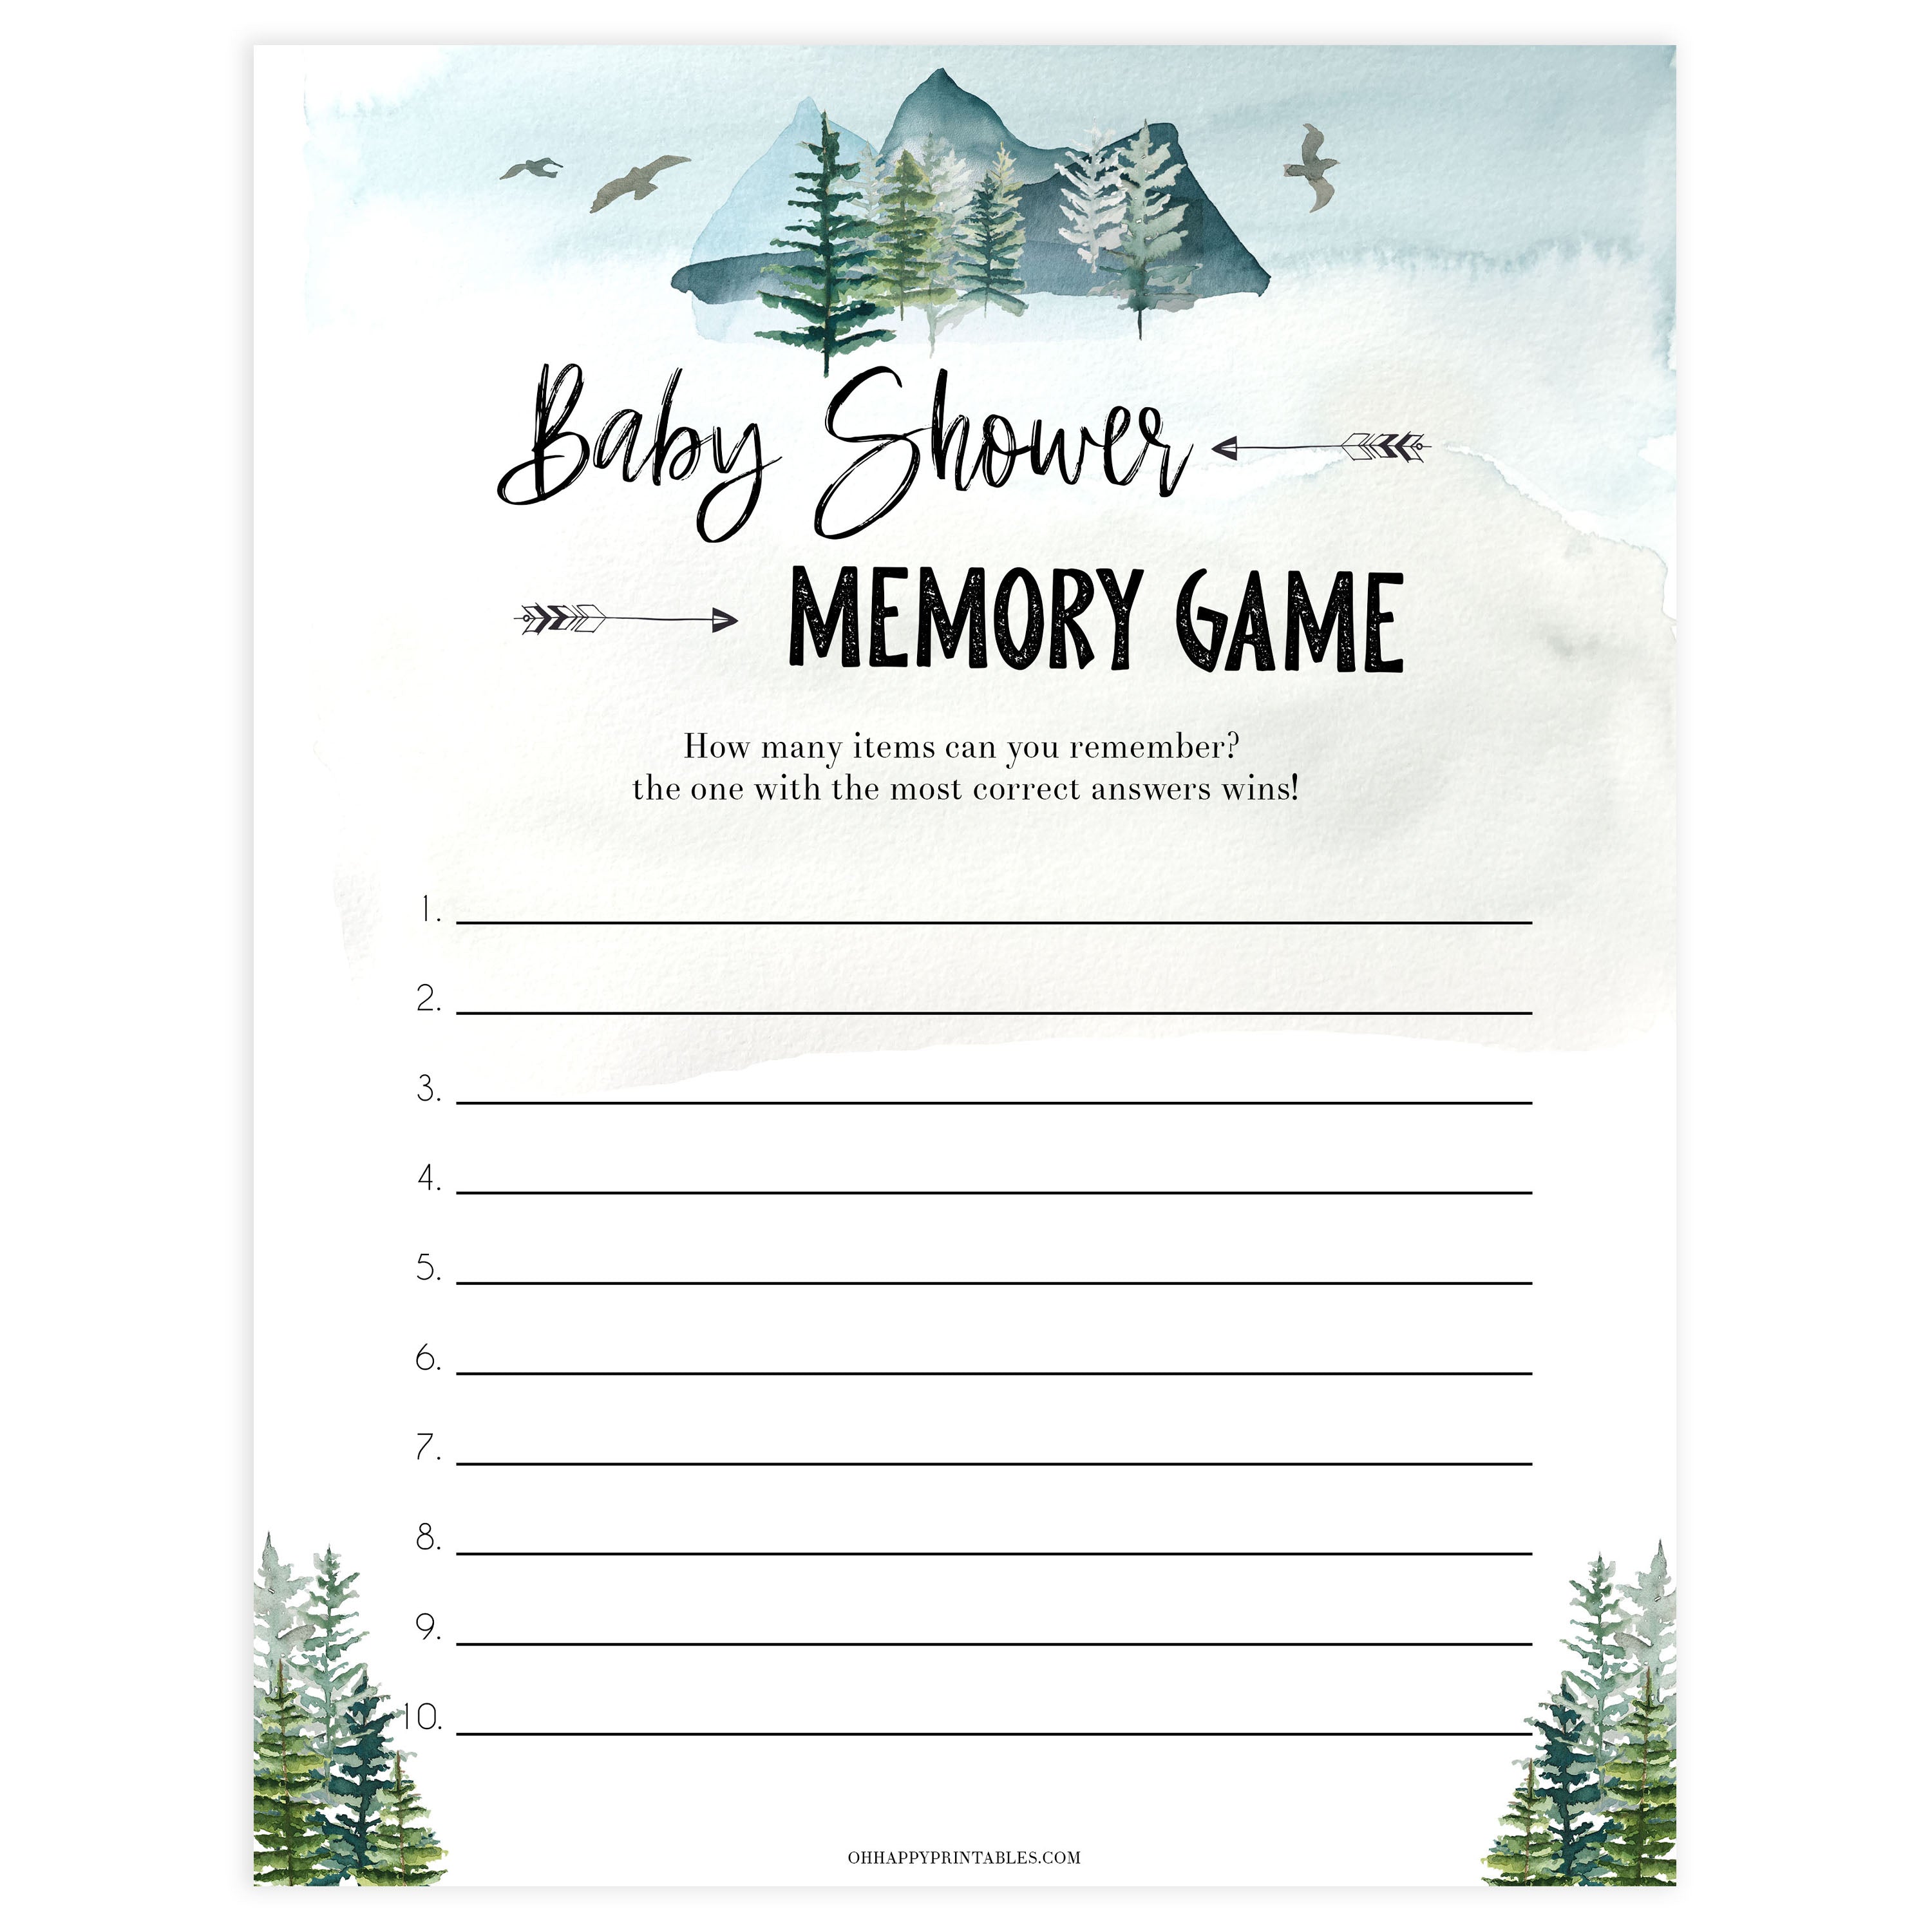 baby memory game, Printable baby shower games, adventure awaits baby games, baby shower games, fun baby shower ideas, top baby shower ideas, adventure awaits baby shower, baby shower games, fun adventure baby shower ideas